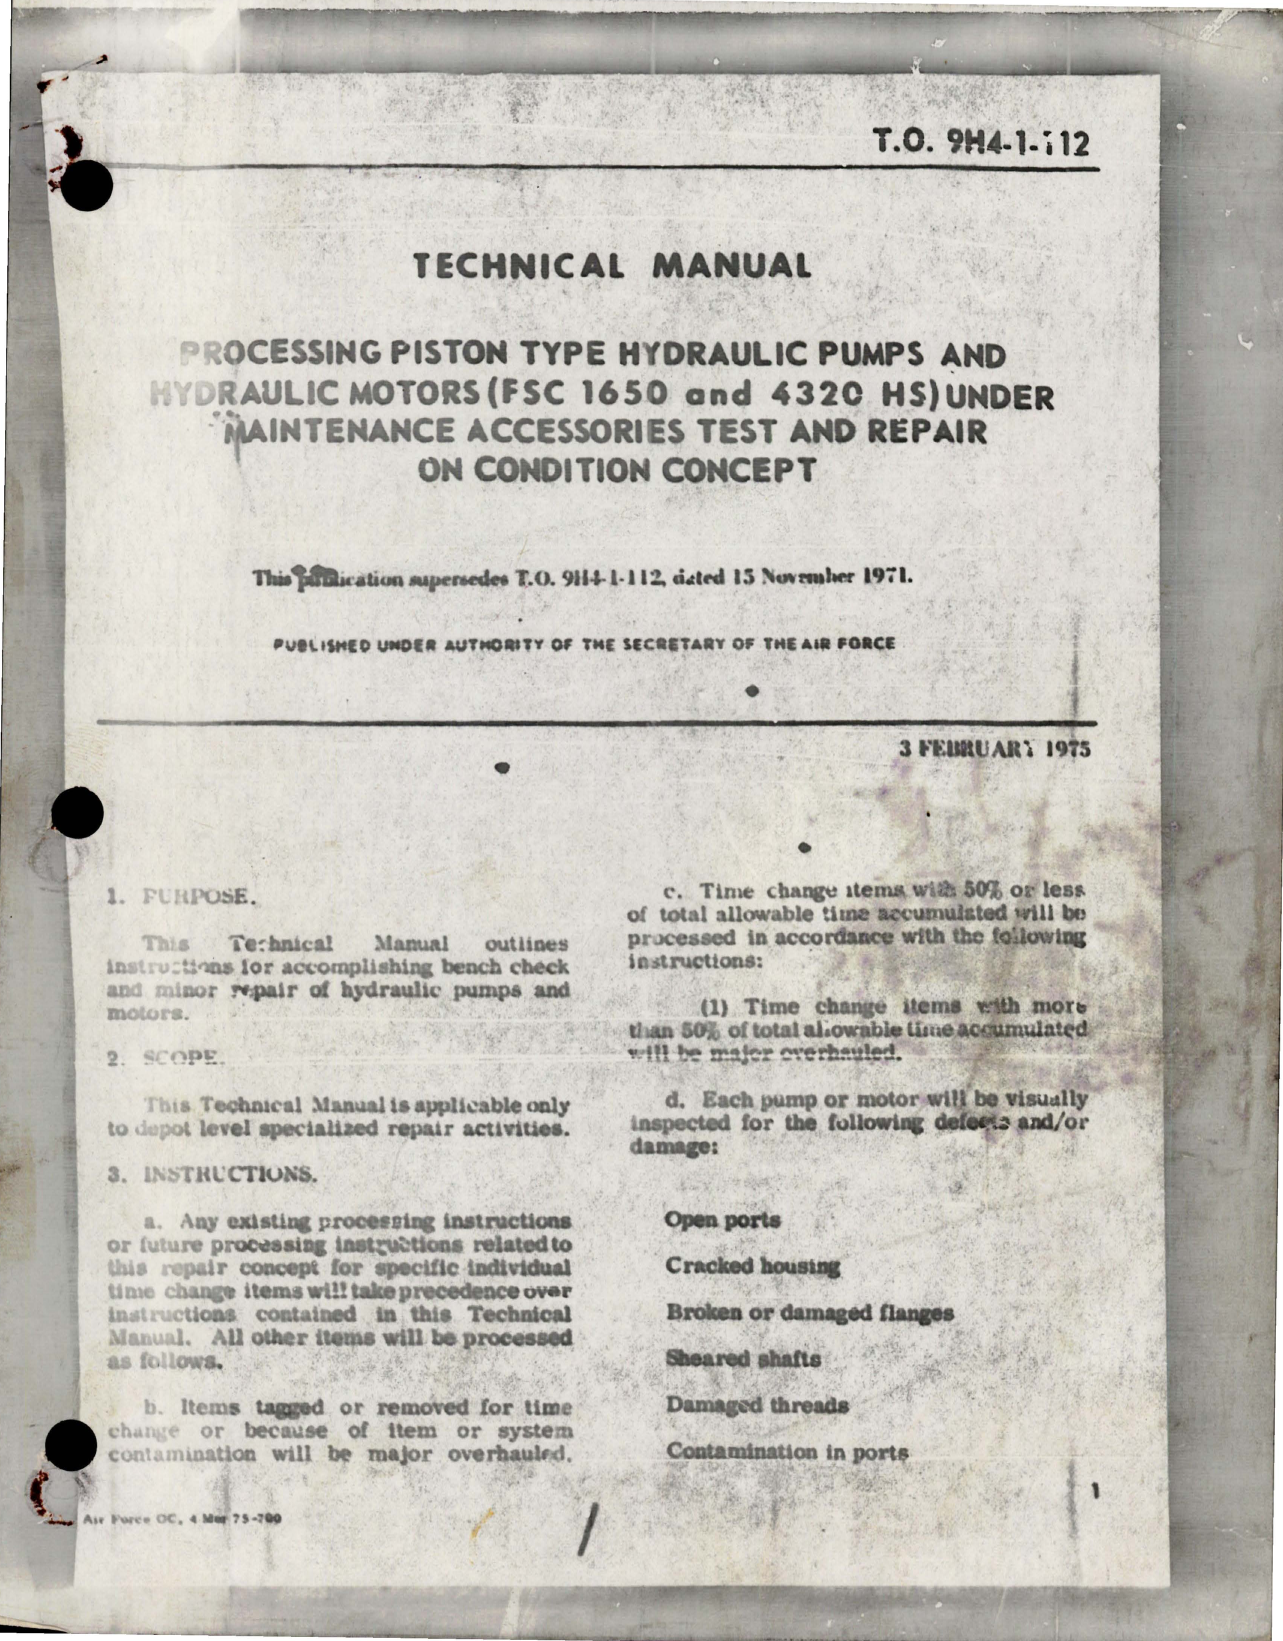 Sample page 1 from AirCorps Library document: Technical Manual for Processing Piston Type Hydraulic Pumps and Hydraulic Motors - FSC 1650 and 4320 HS